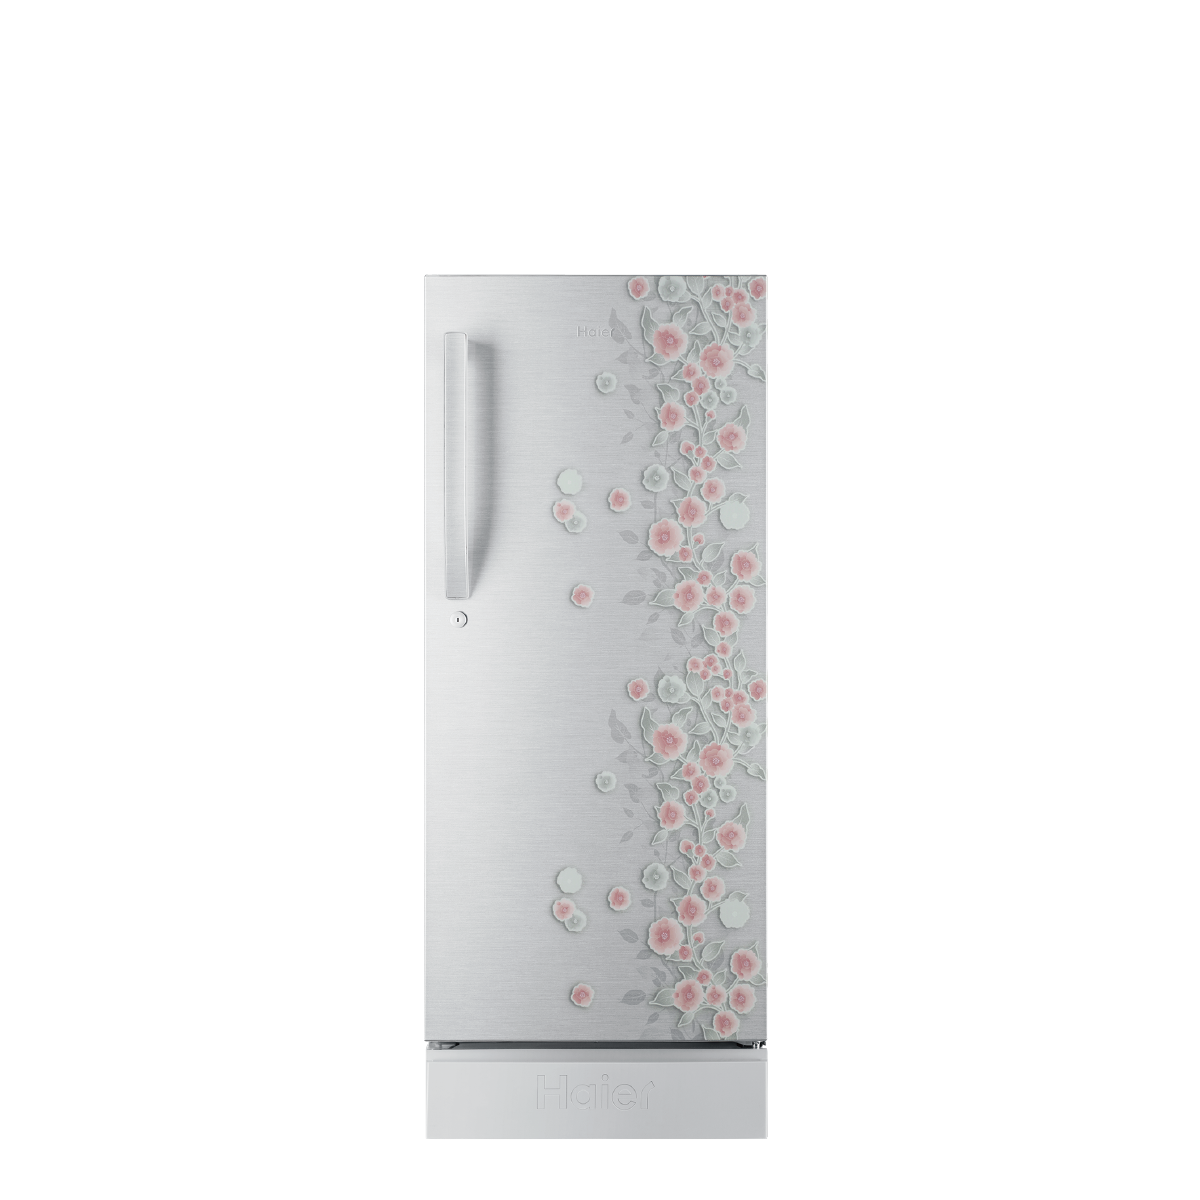 Download PNG image - Fridge PNG Background Isolated Image 